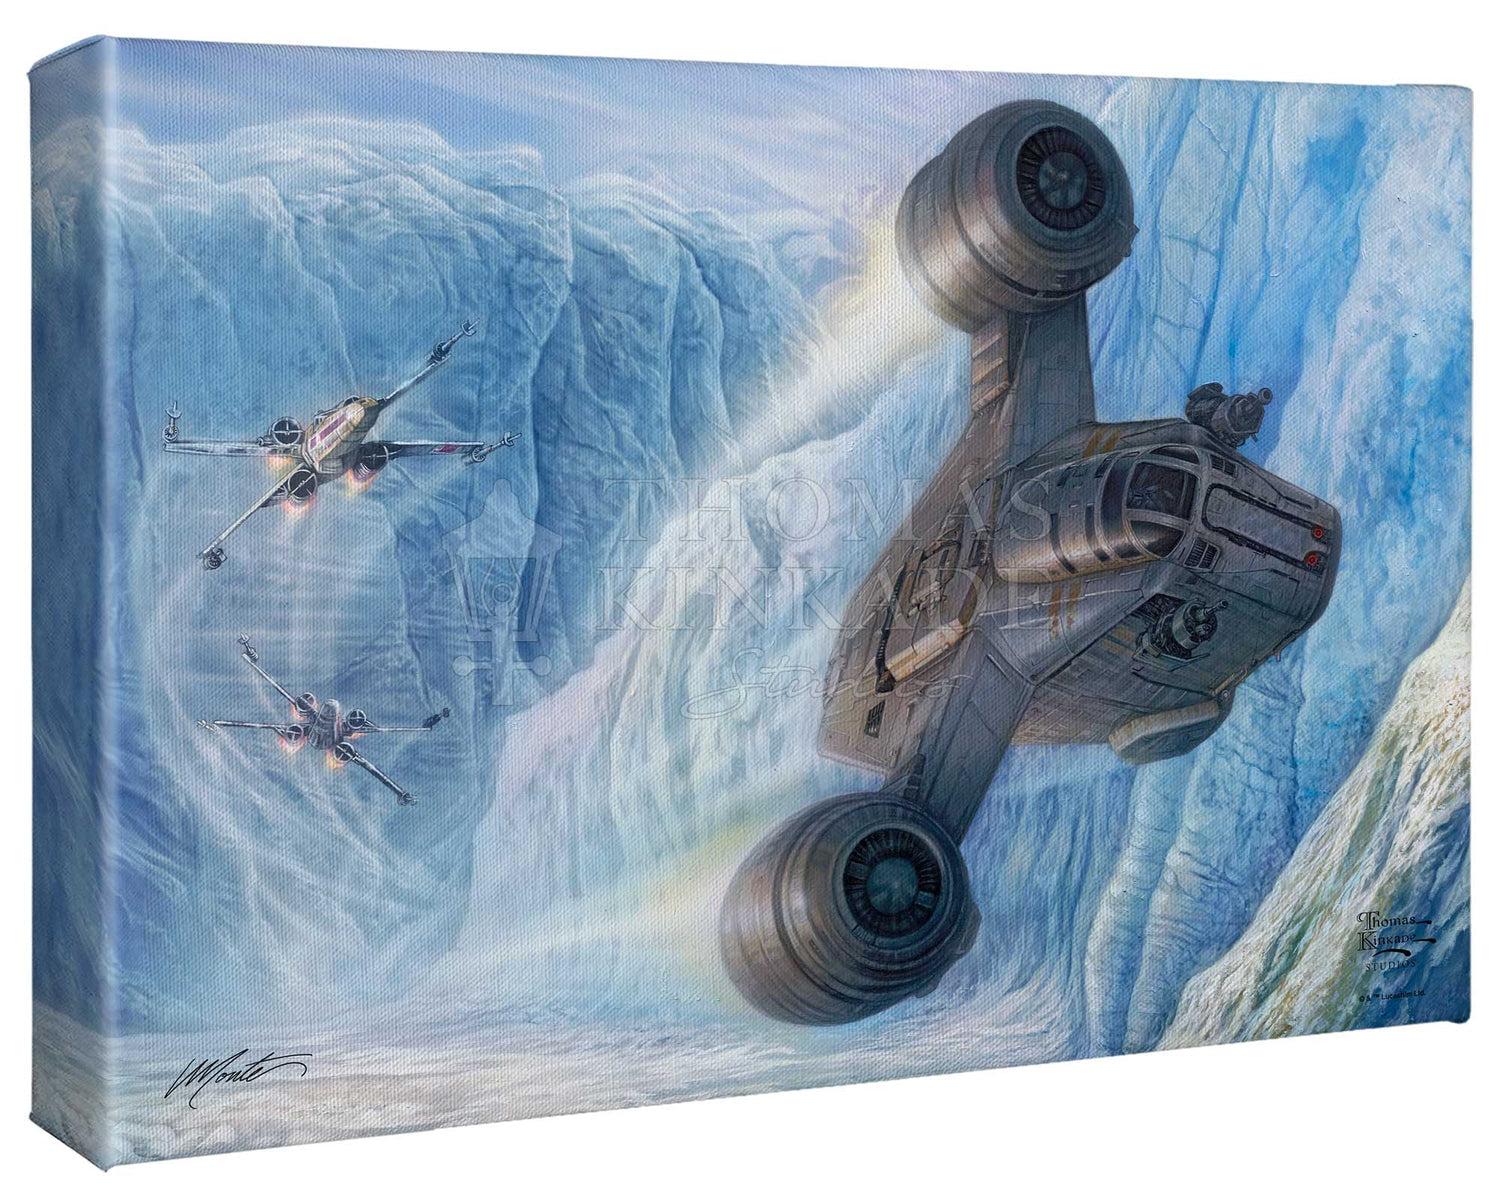 The Razor Crest is being chased by two  X-wing fighters. Artwork is inspired by Star Wars TV series, The Mandalorian. Gallery Wrap